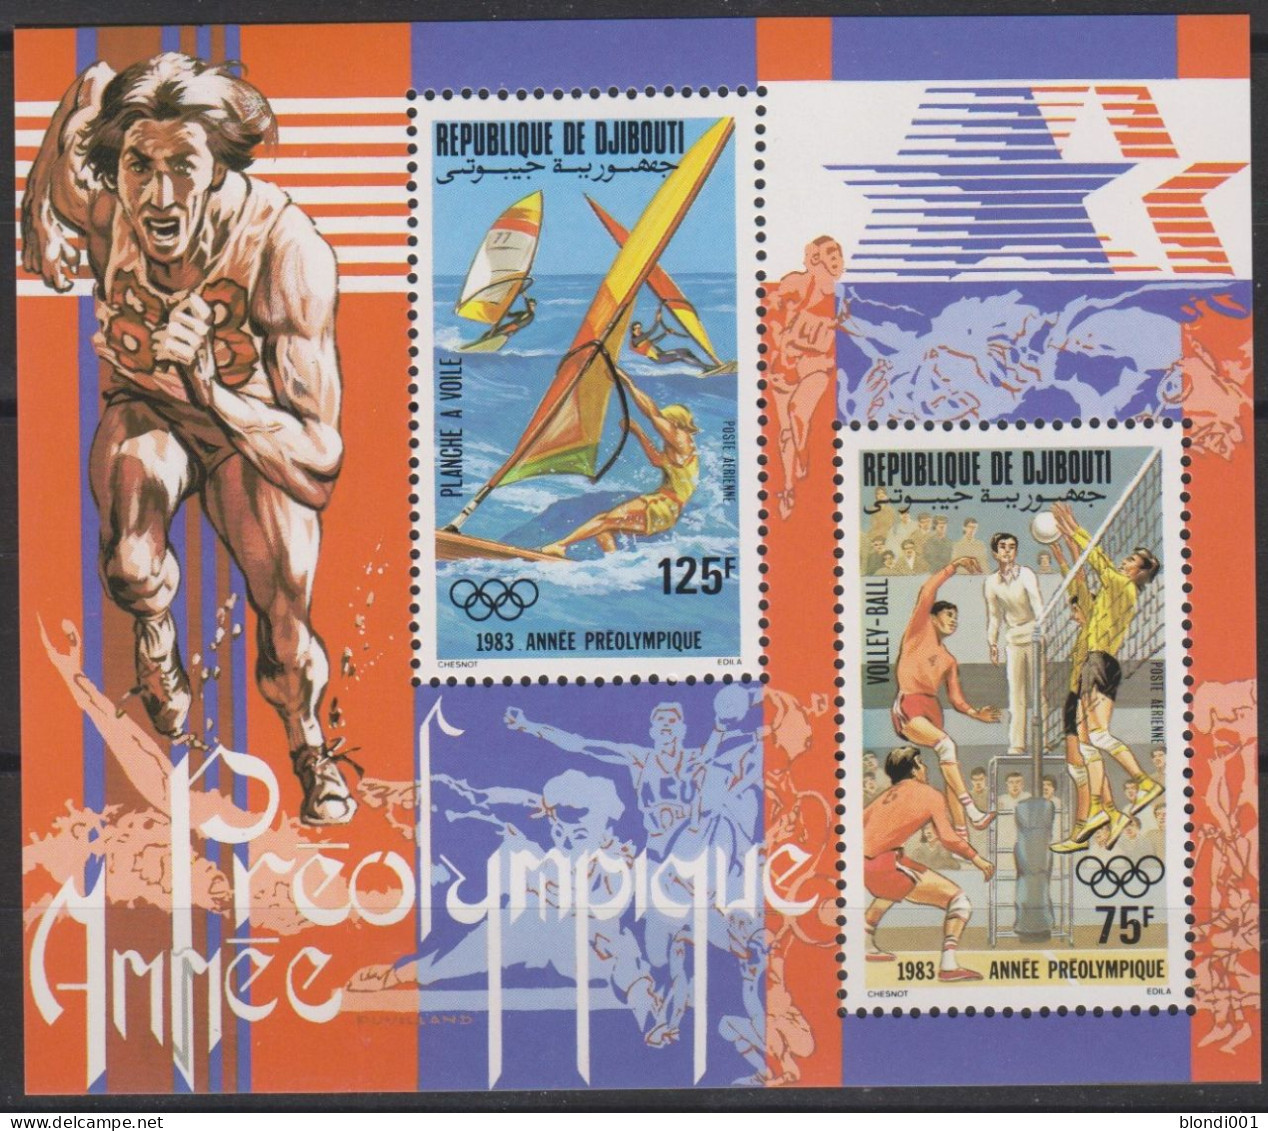 Olympics 1984 - Volleyball - DJIBOUTI - S/S Perf. De Luxe MNH - Sommer 1984: Los Angeles